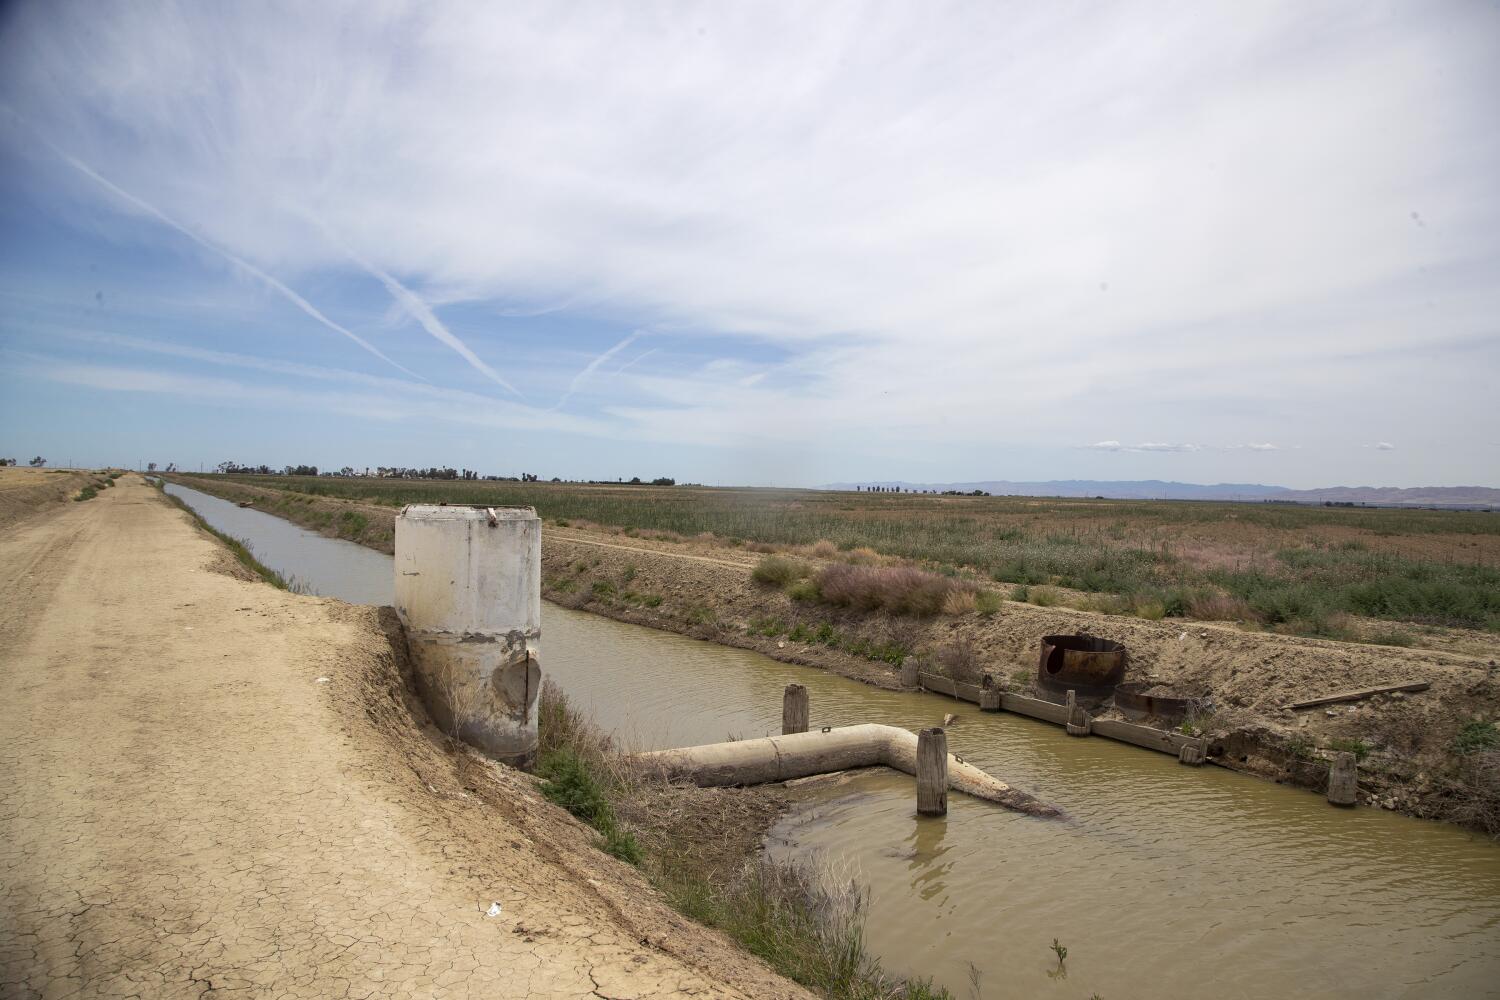 feds say he masterminded an epic california water heist. some farmers say he's their robin hood